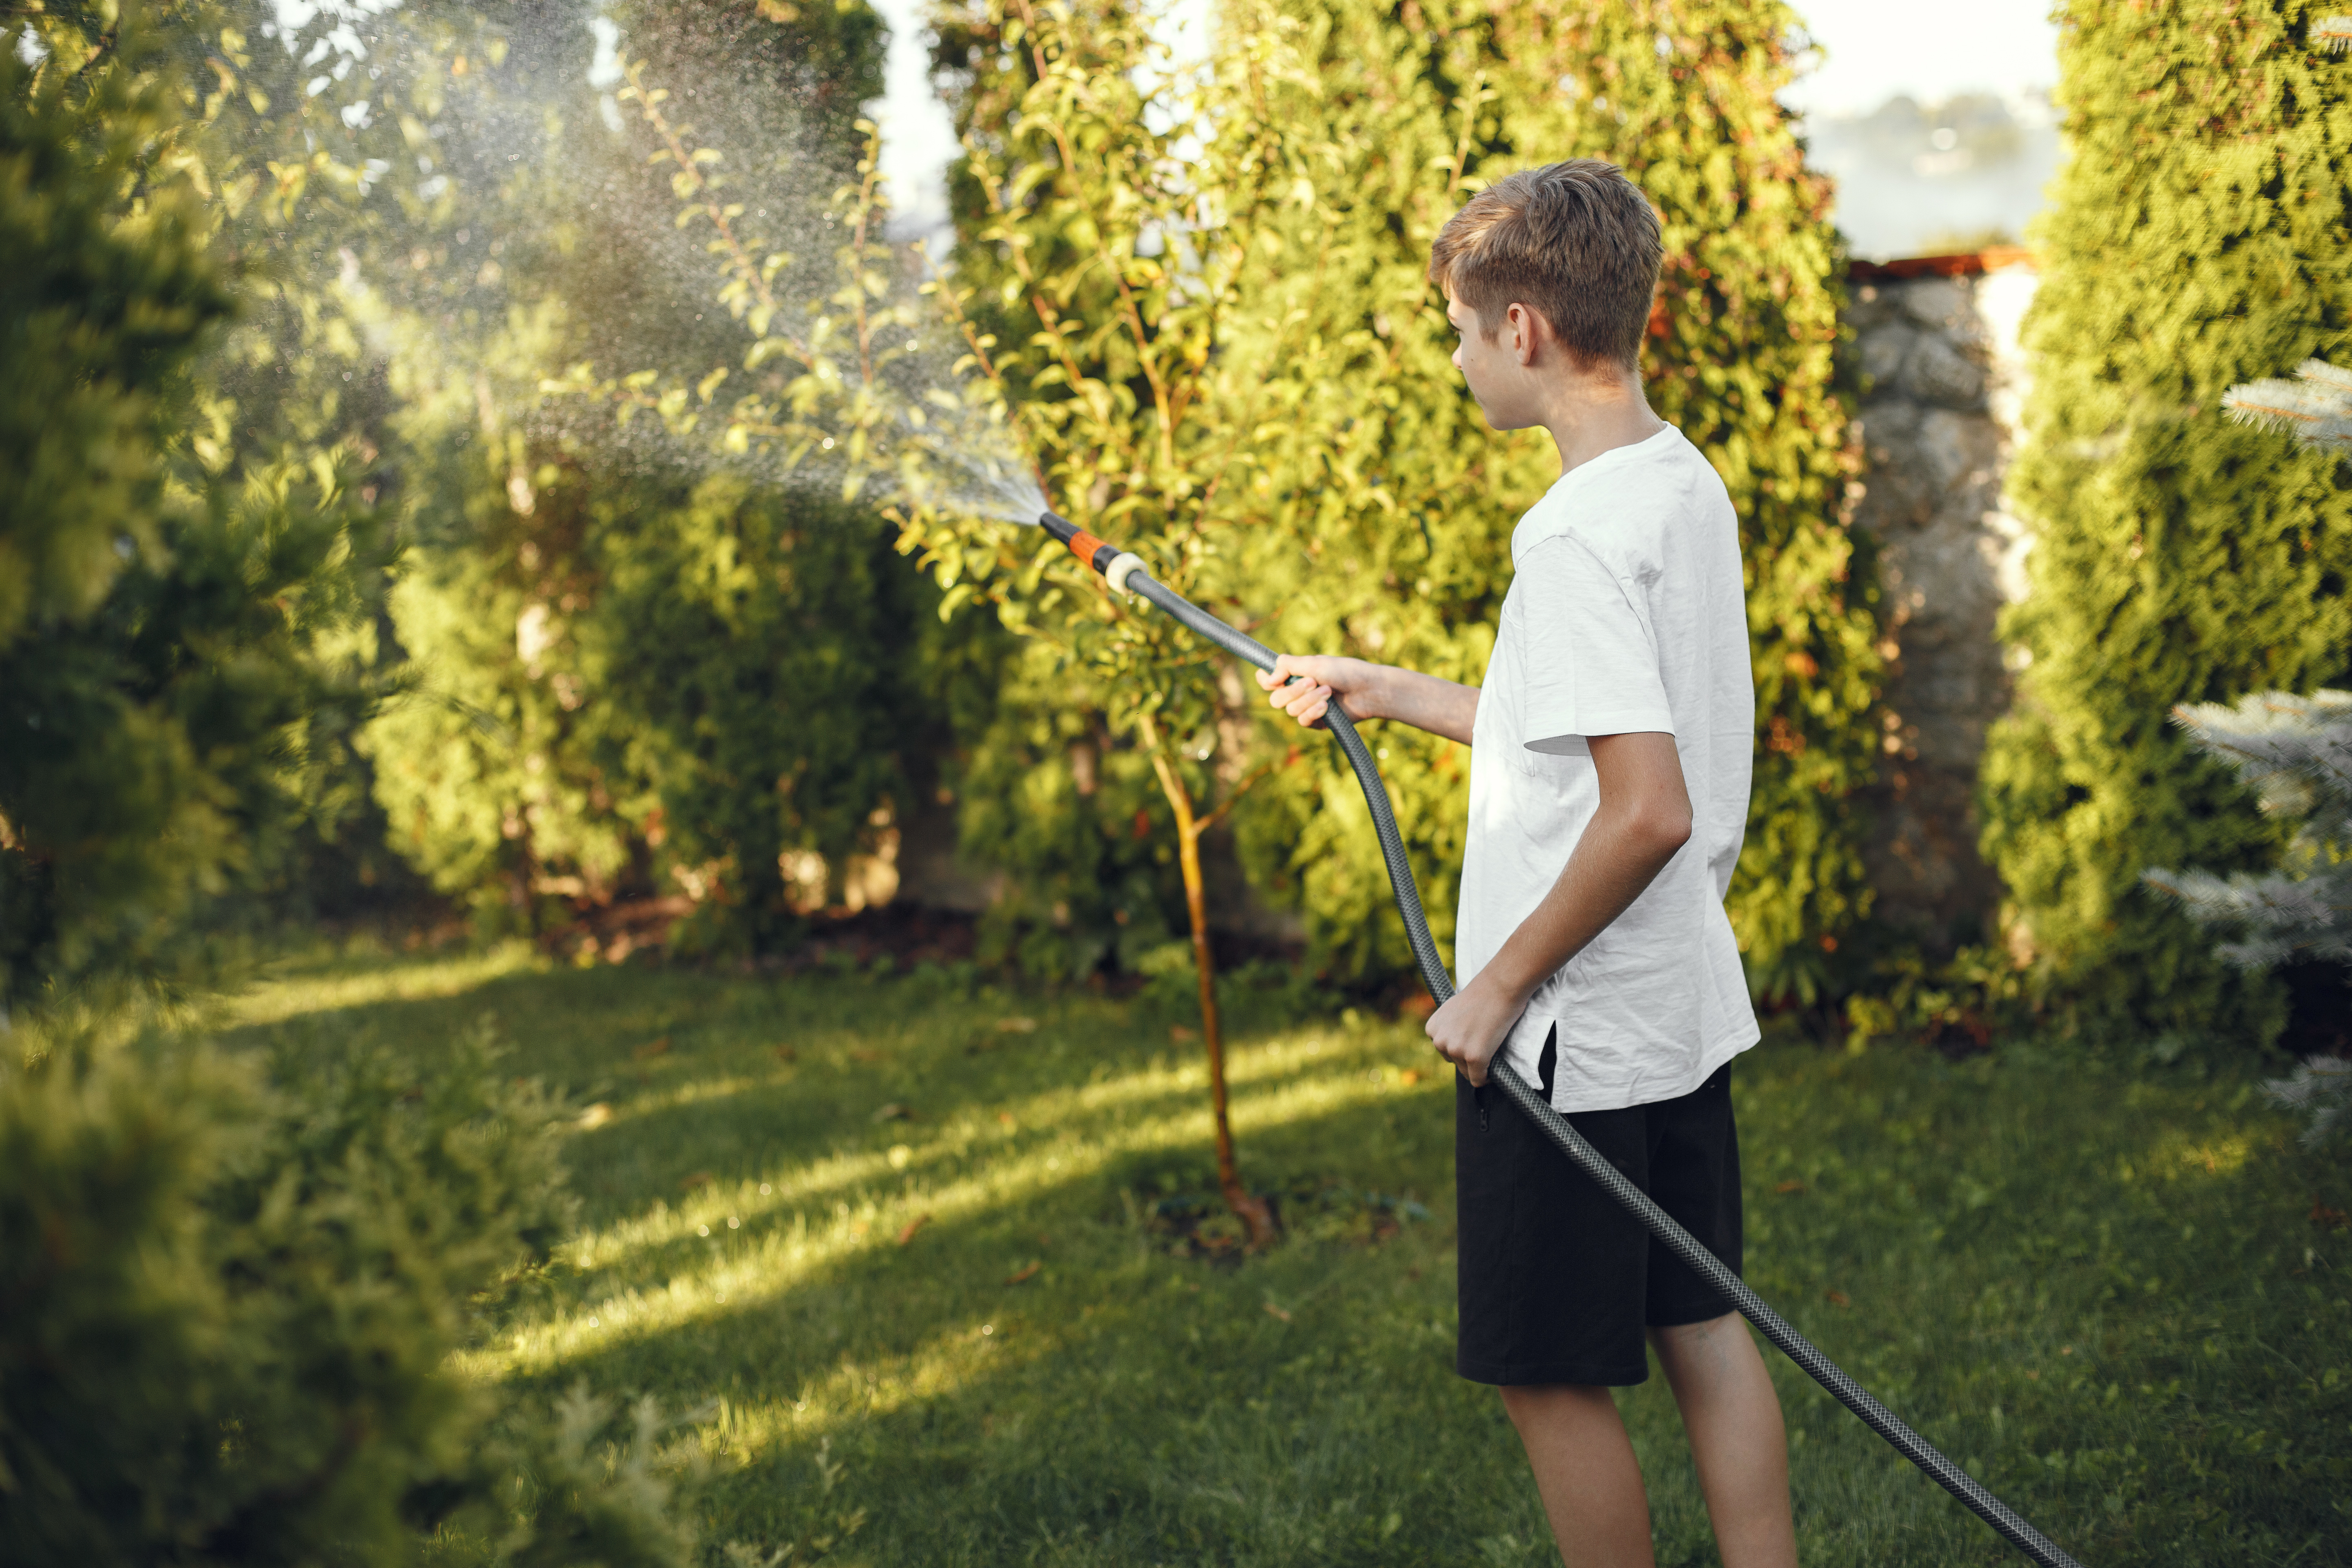 A young boy watering trees with a hose